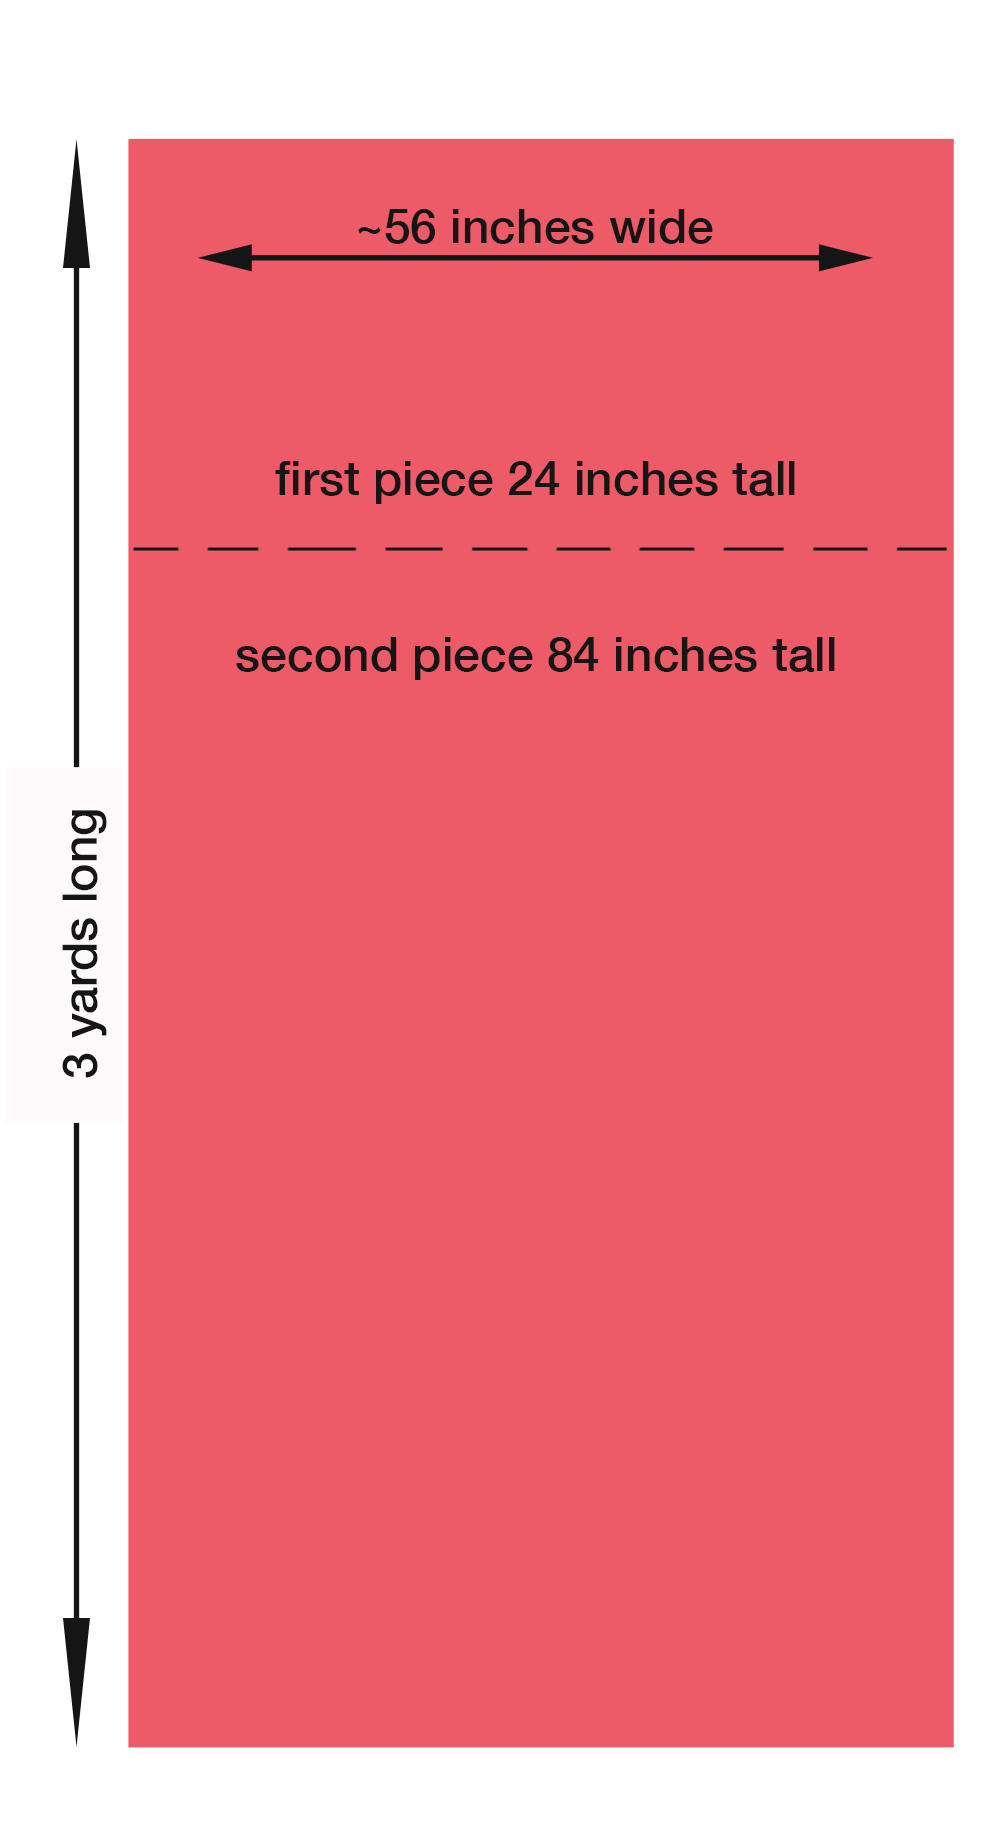 Diagram showing 3 yards of fabric, cutting a piece from the top that is 24 inches tall